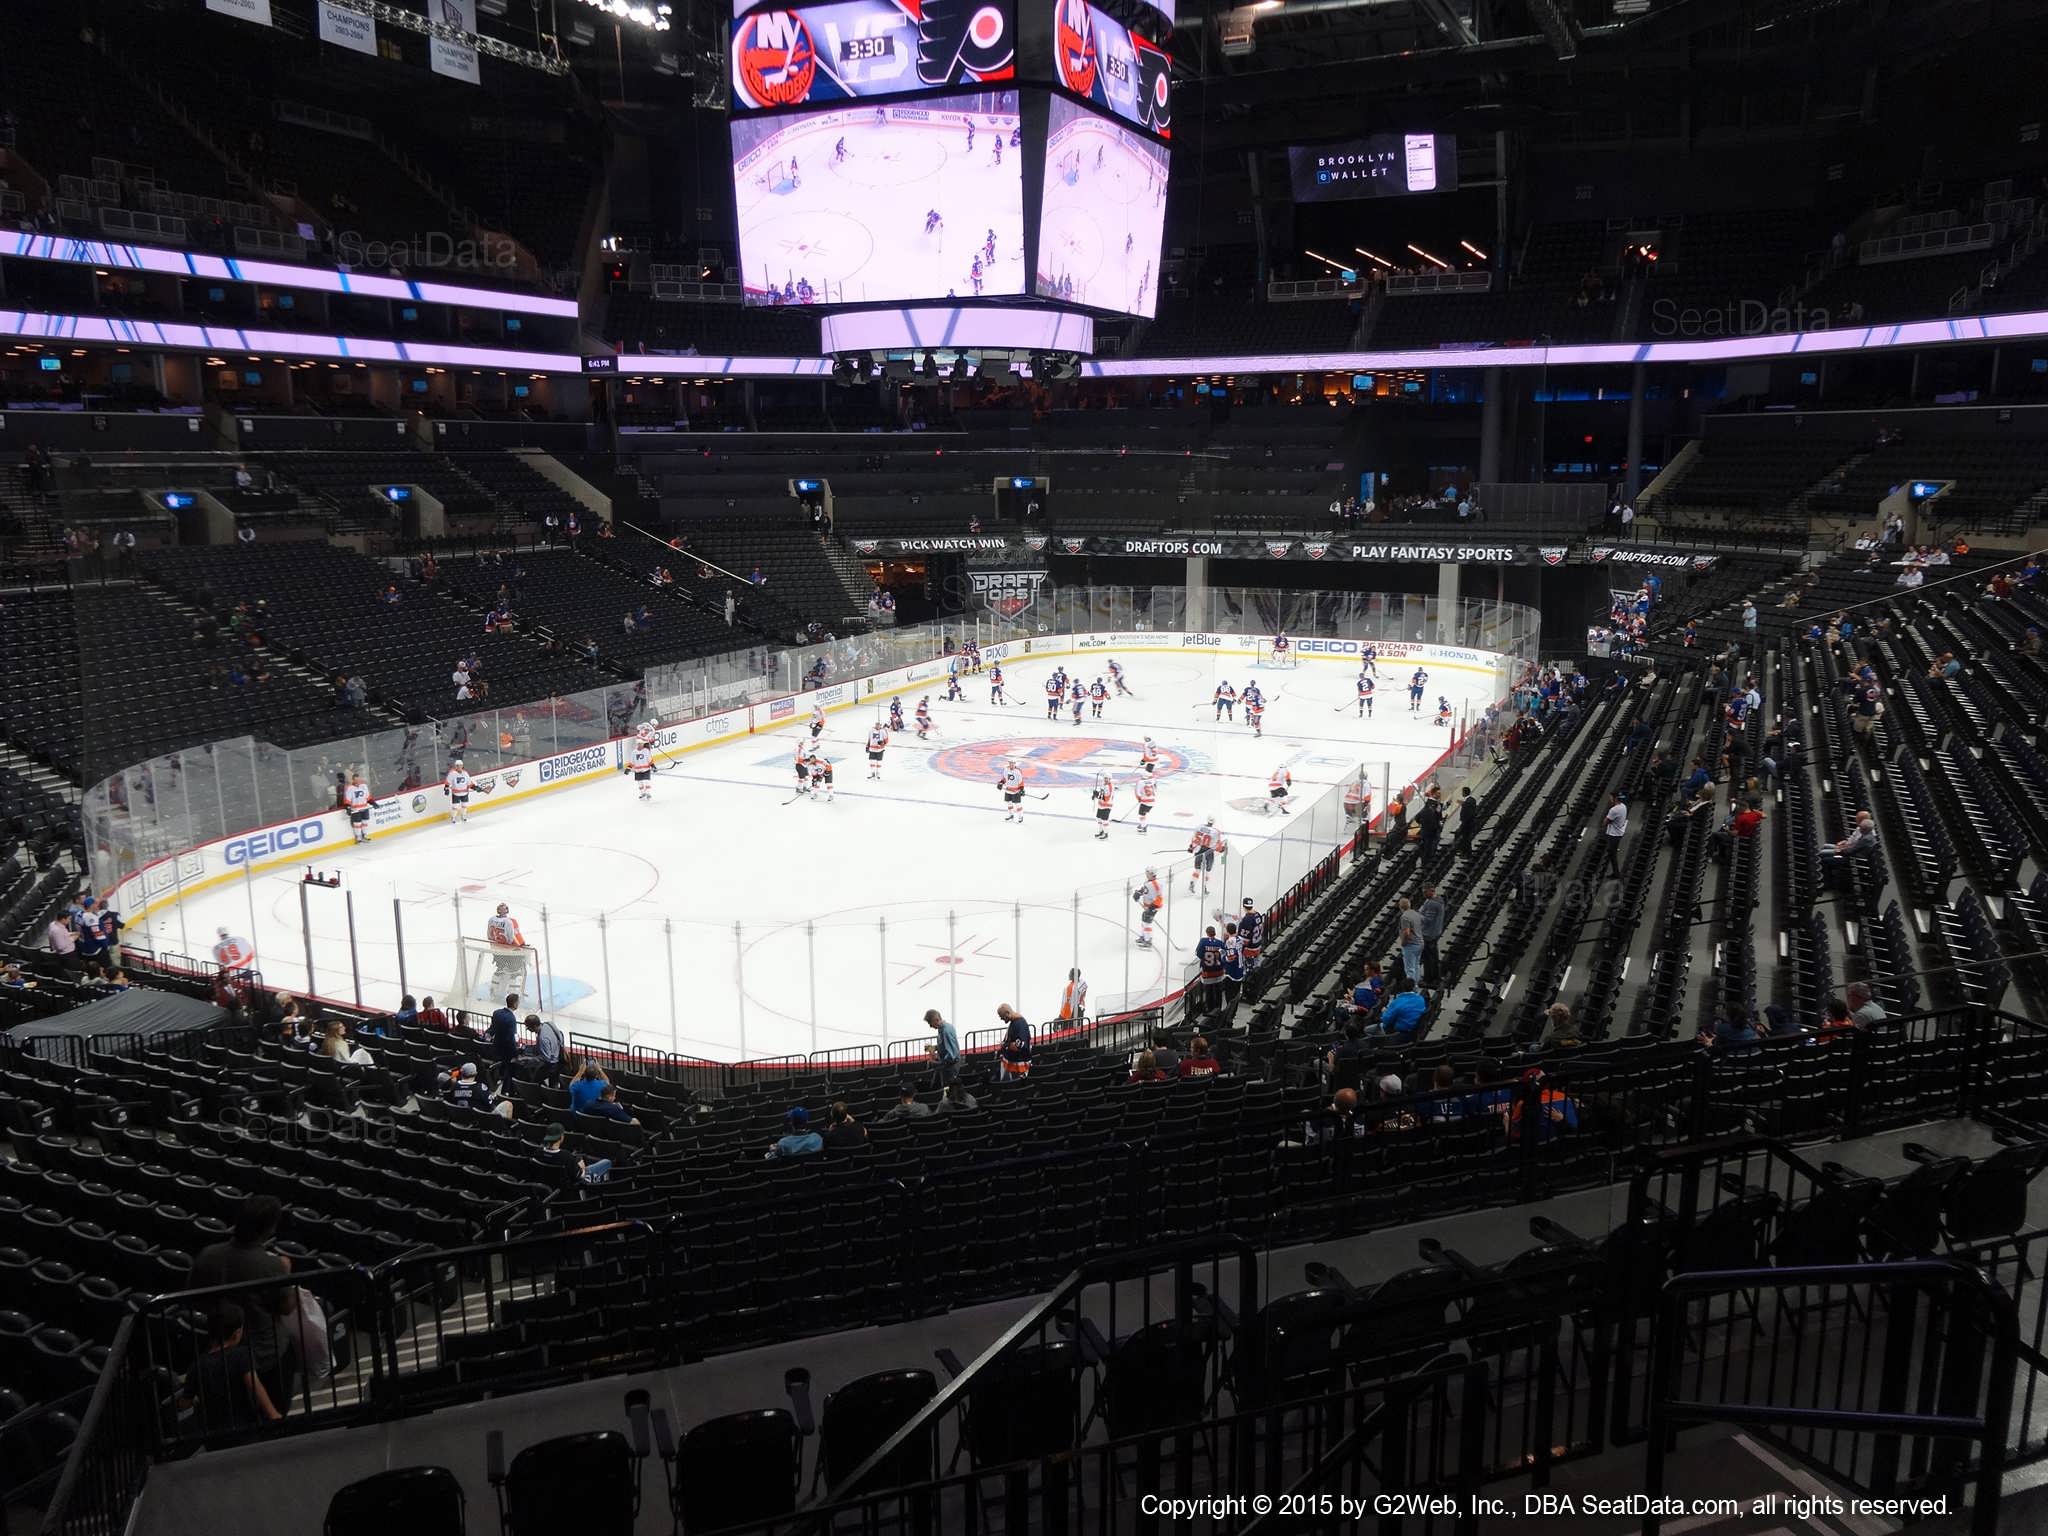 Seat View from Section 114 at the Barclays Center, home of the New York Islanders